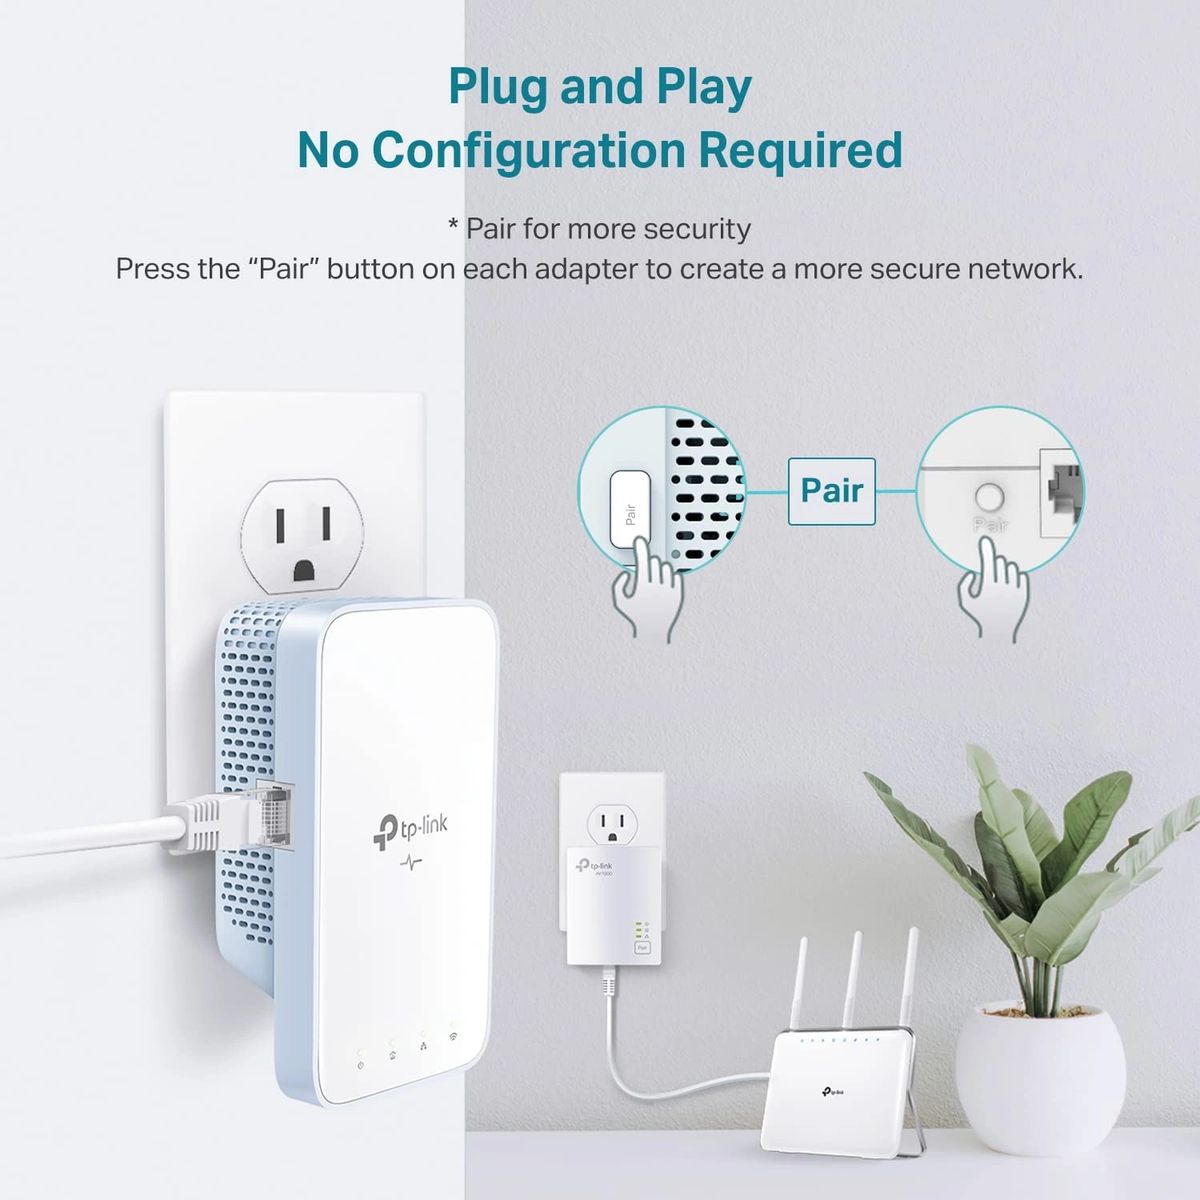 TP-Link Powerline WiFi - AV1000 Powerline Ethernet Adapter with Dual Band